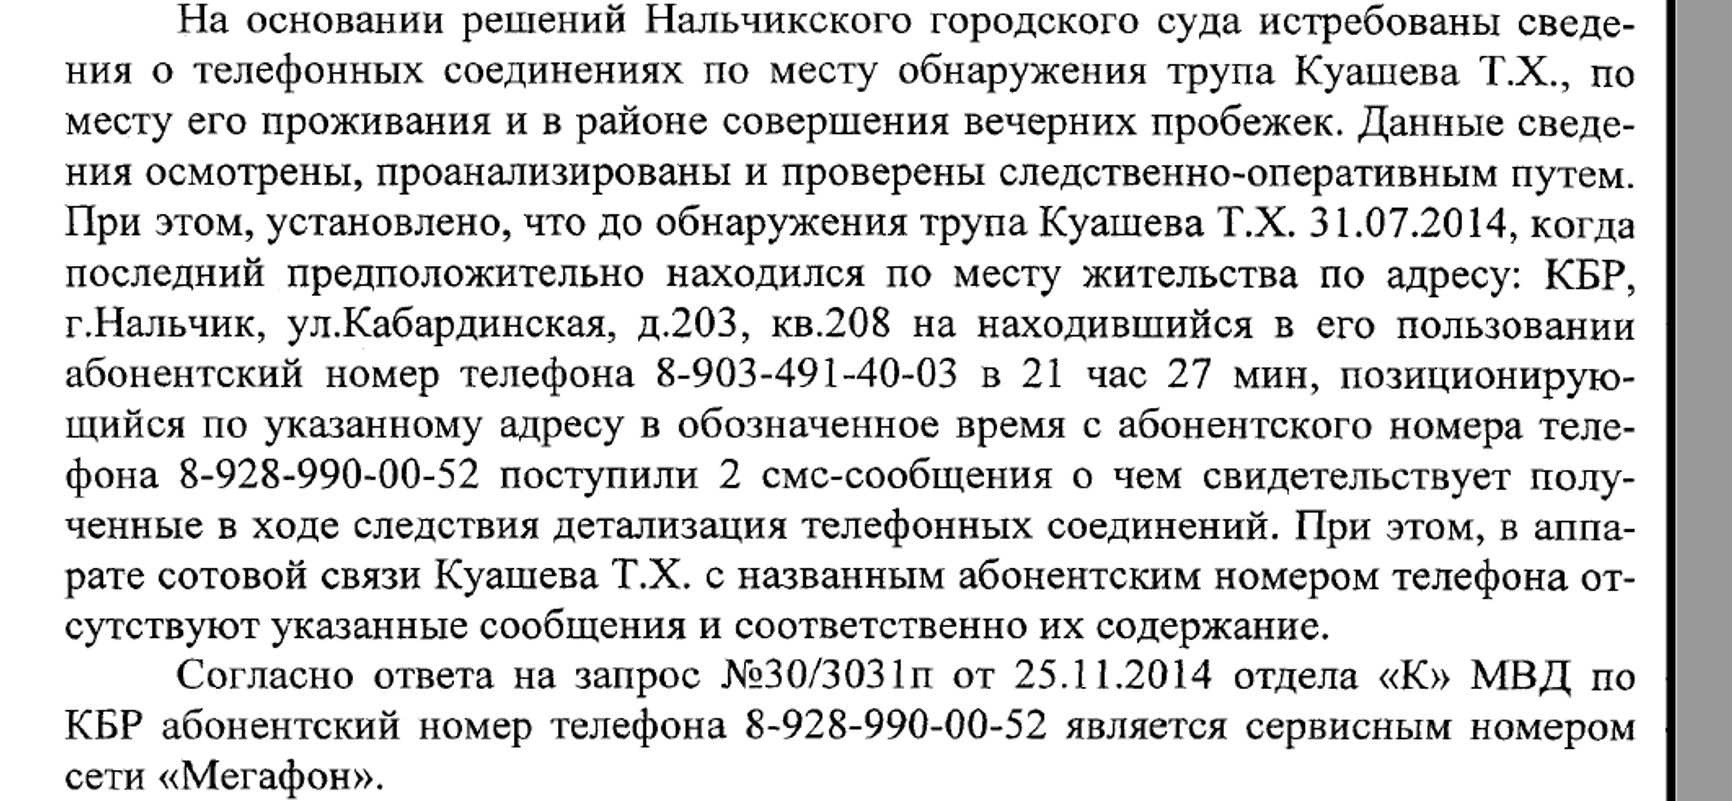 An excerpt from the case file regarding Megafon's reply to the request for Kuashev's cell phone records (in Russian)